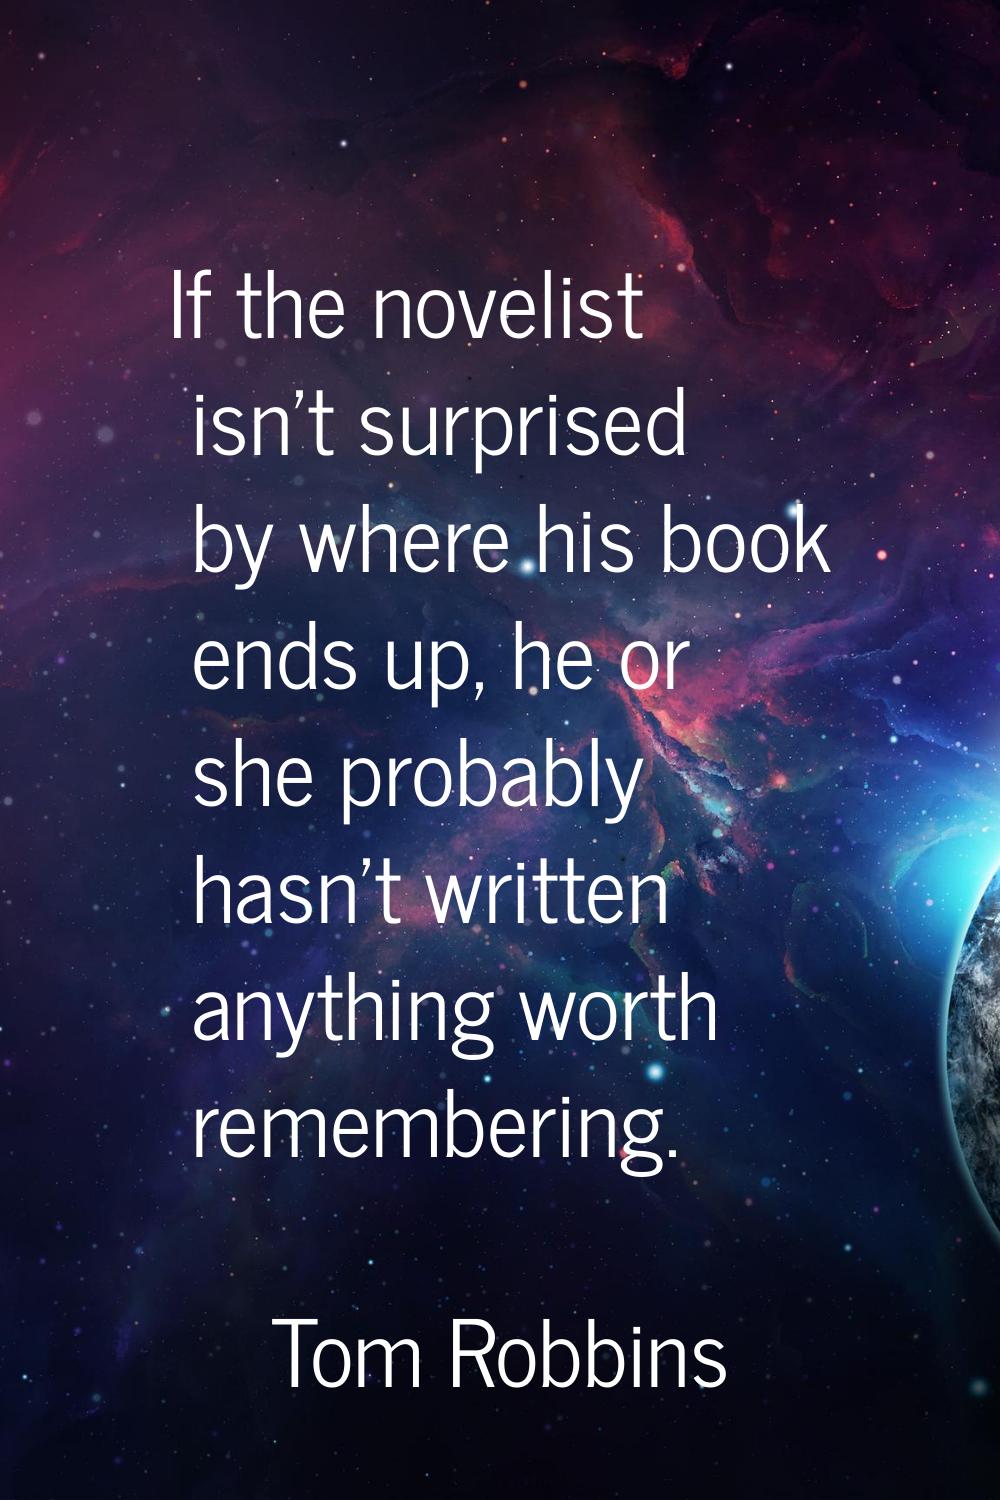 If the novelist isn't surprised by where his book ends up, he or she probably hasn't written anythi